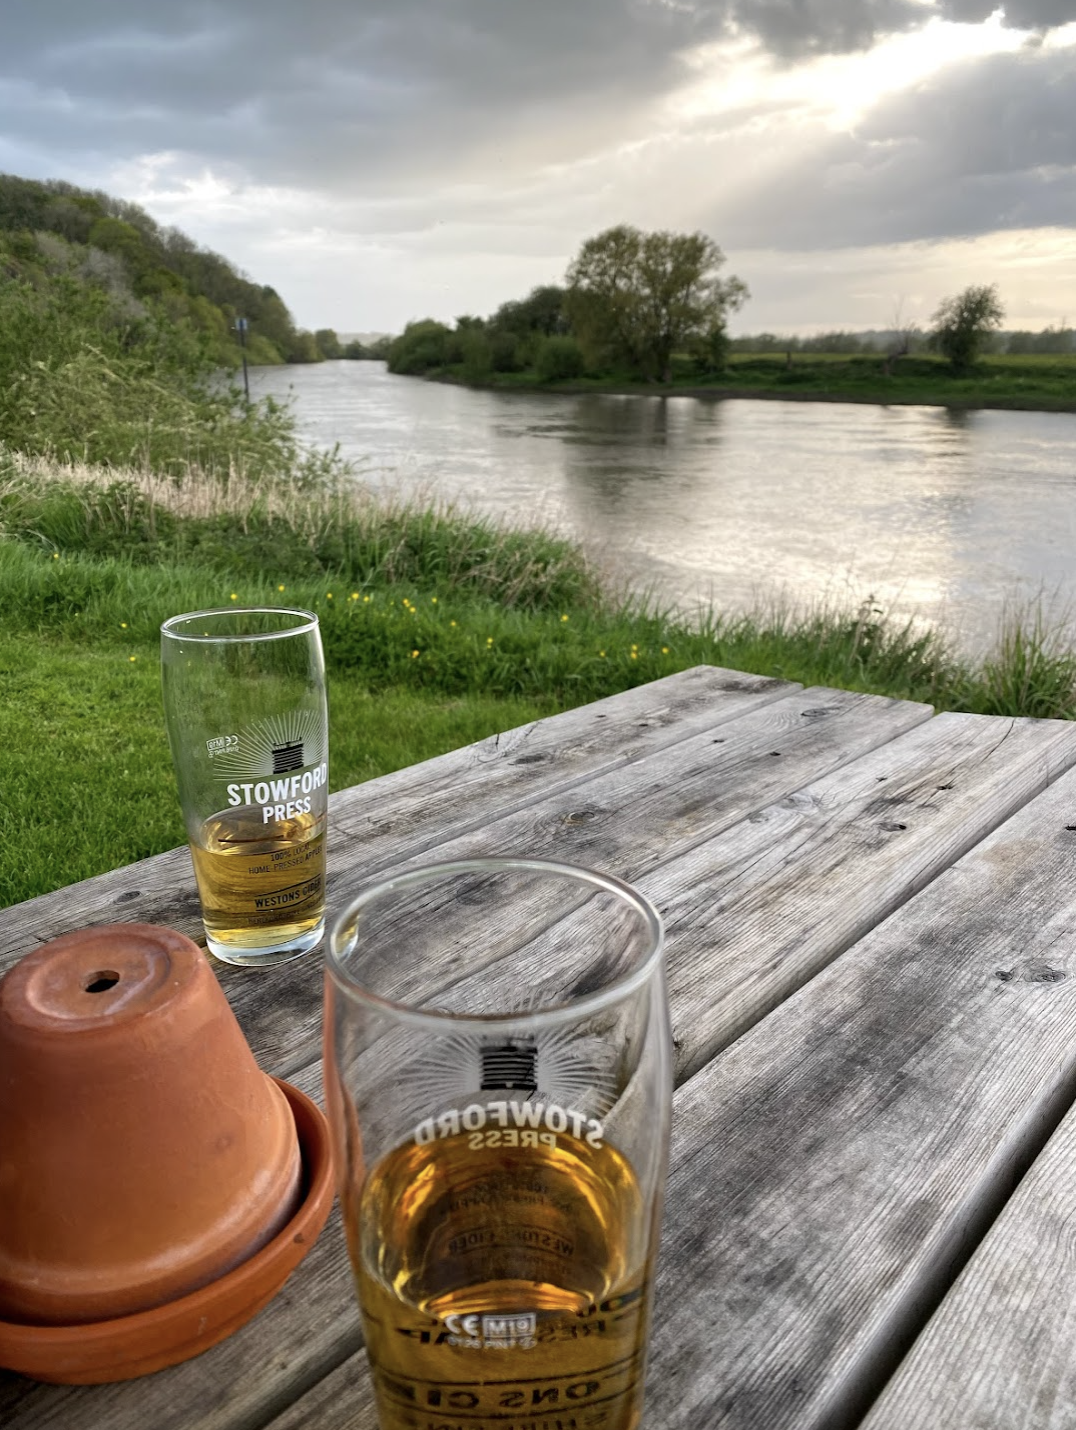 Riverside drinks at the Red Lion, Wainlode